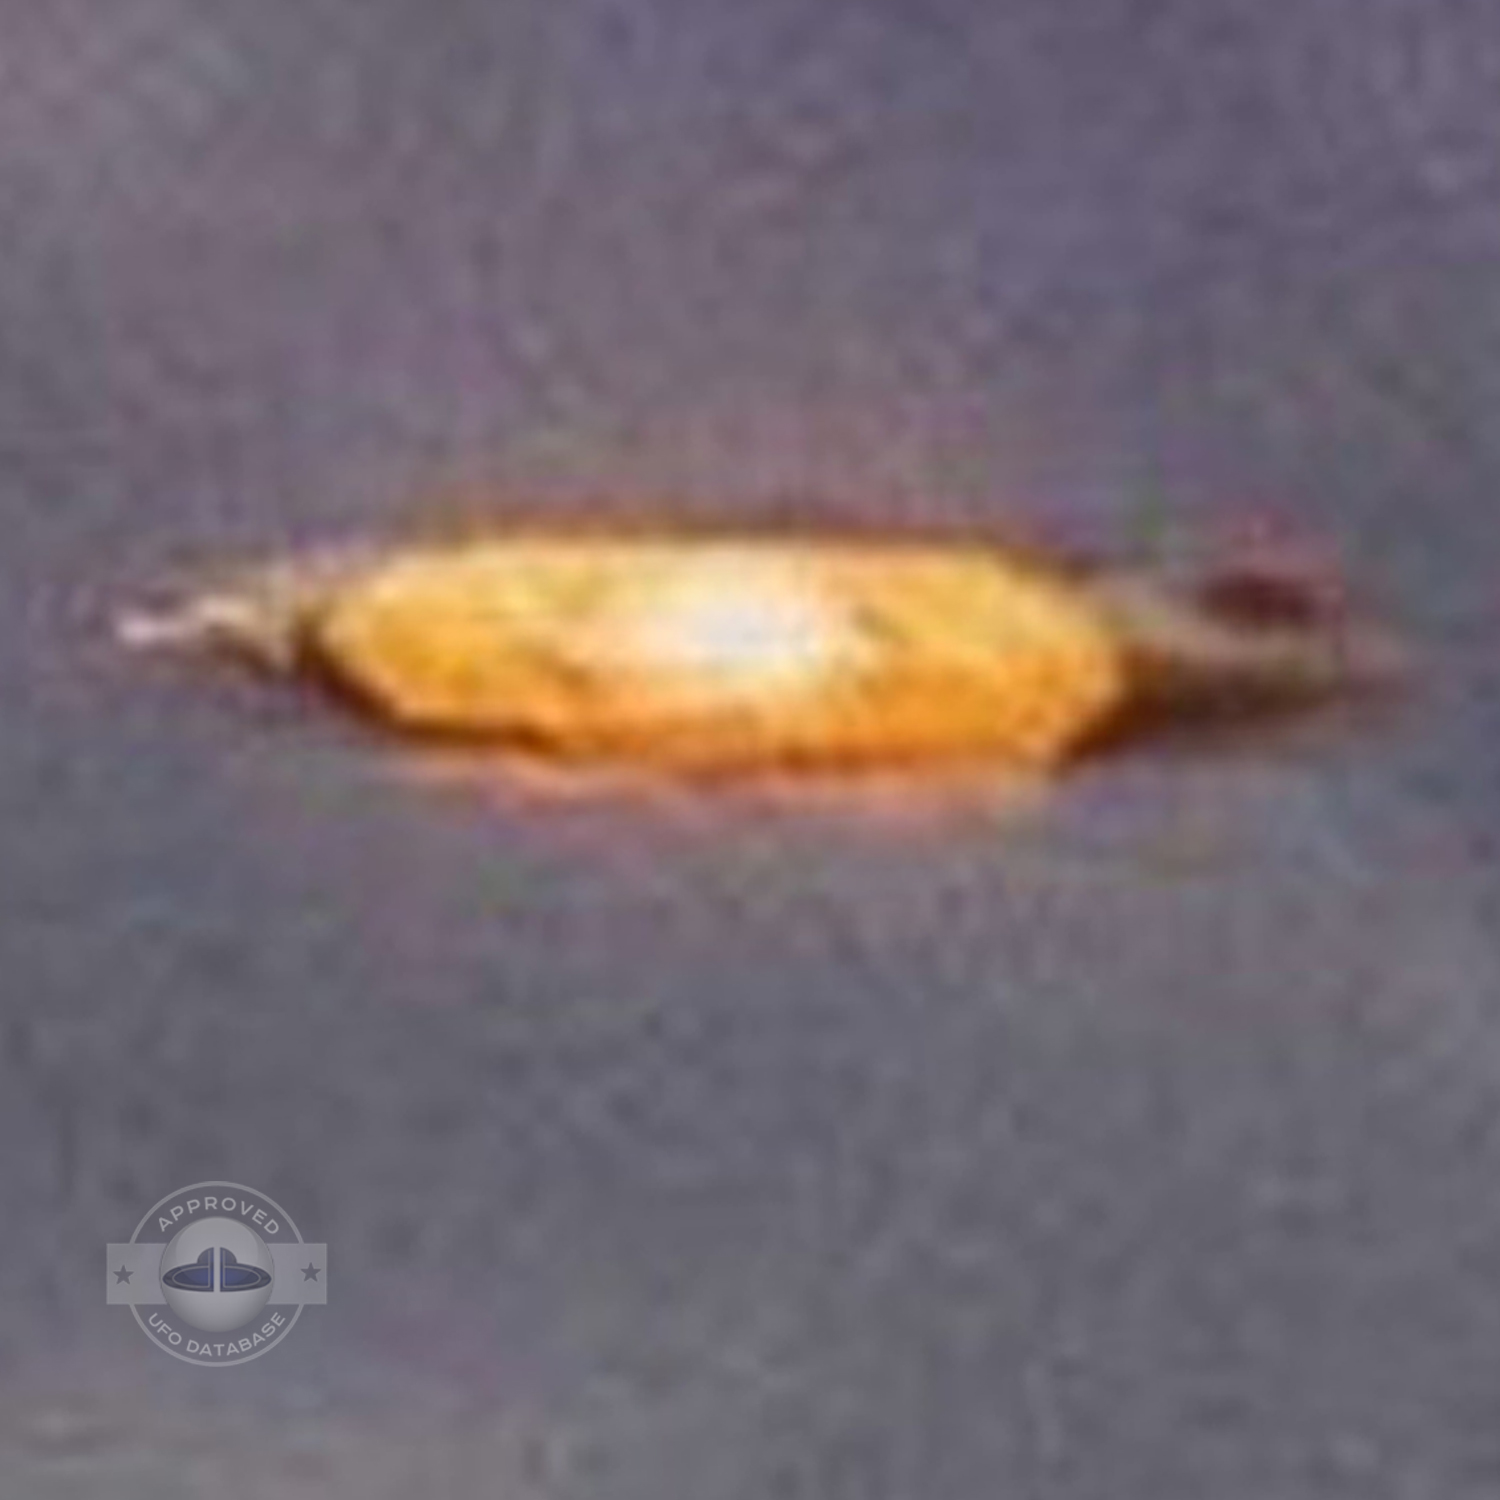 UFO picture - We can see at the center of the UFO an orange light UFO Picture #130-4